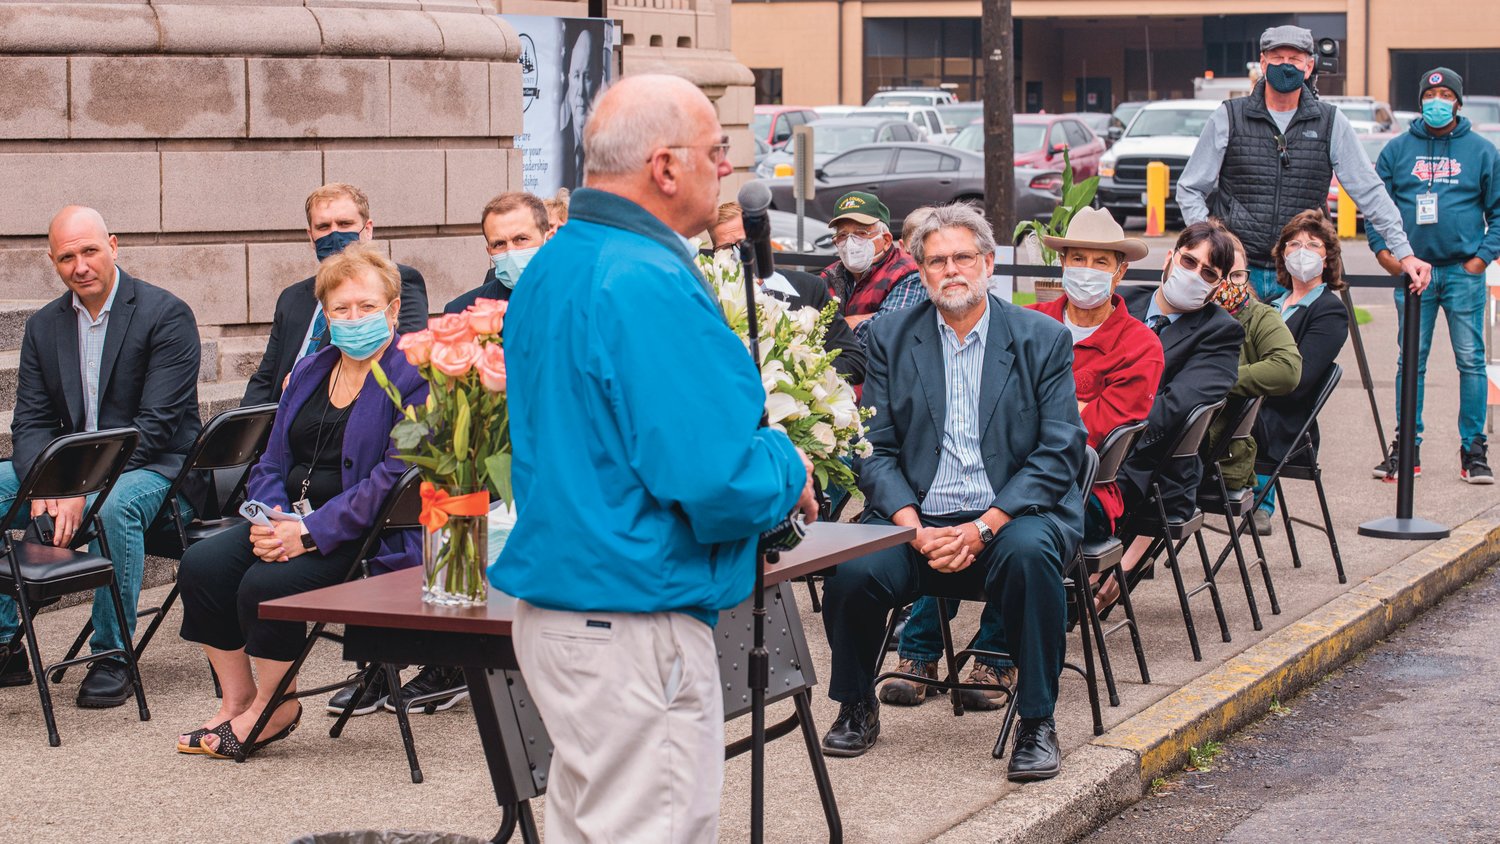 Community leaders and friends share stories about Gary Stamper during a ceremony honoring his life Friday morning outside the Lewis County Historical Courthouse in Chehalis.